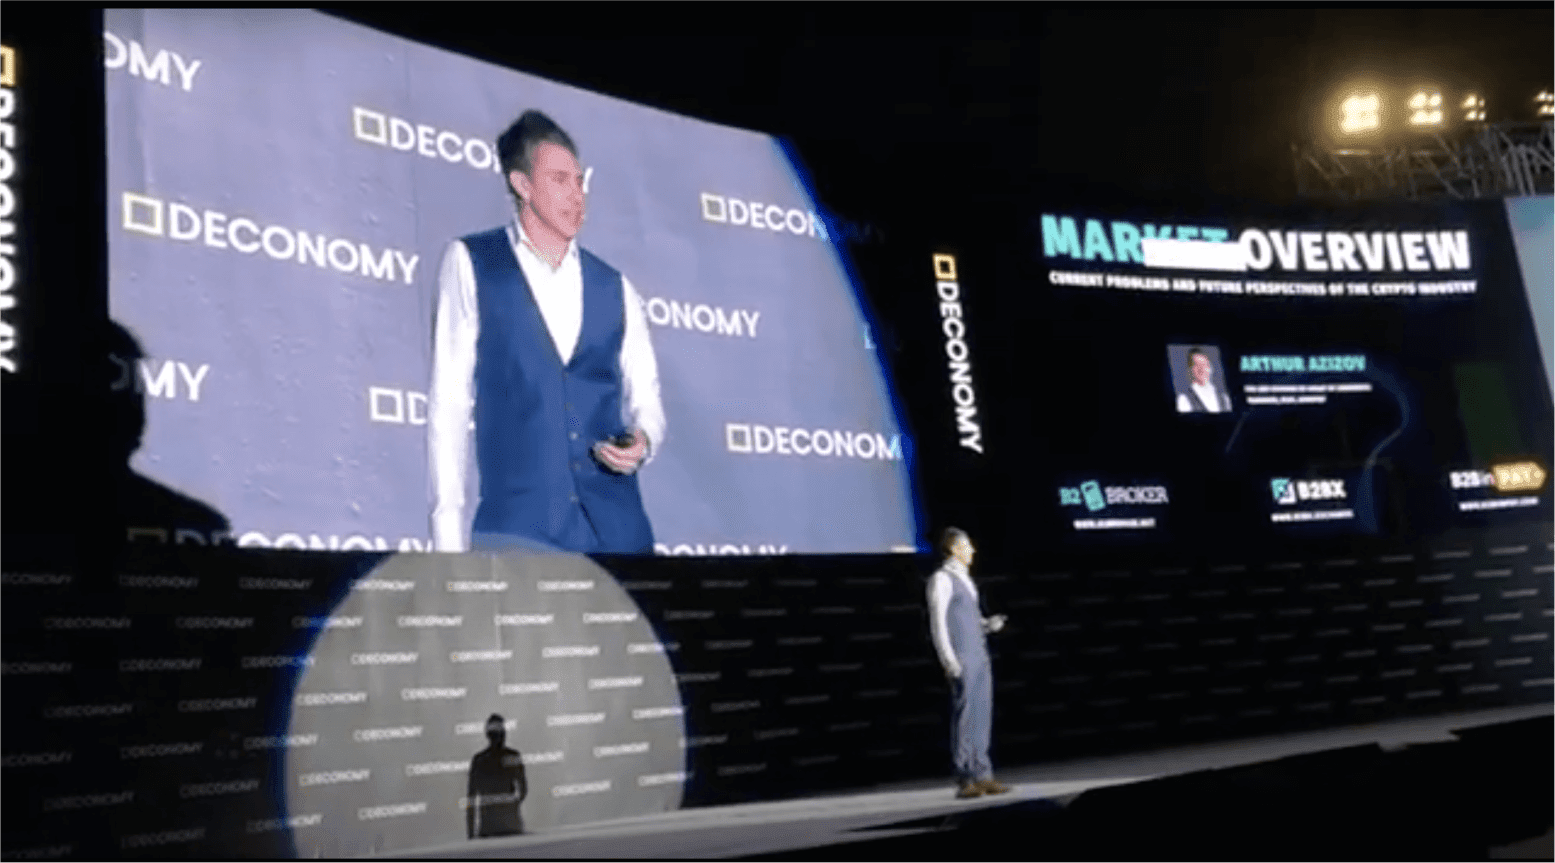 Deconomy 2019 – B2Broker’s CEO with Market Overview